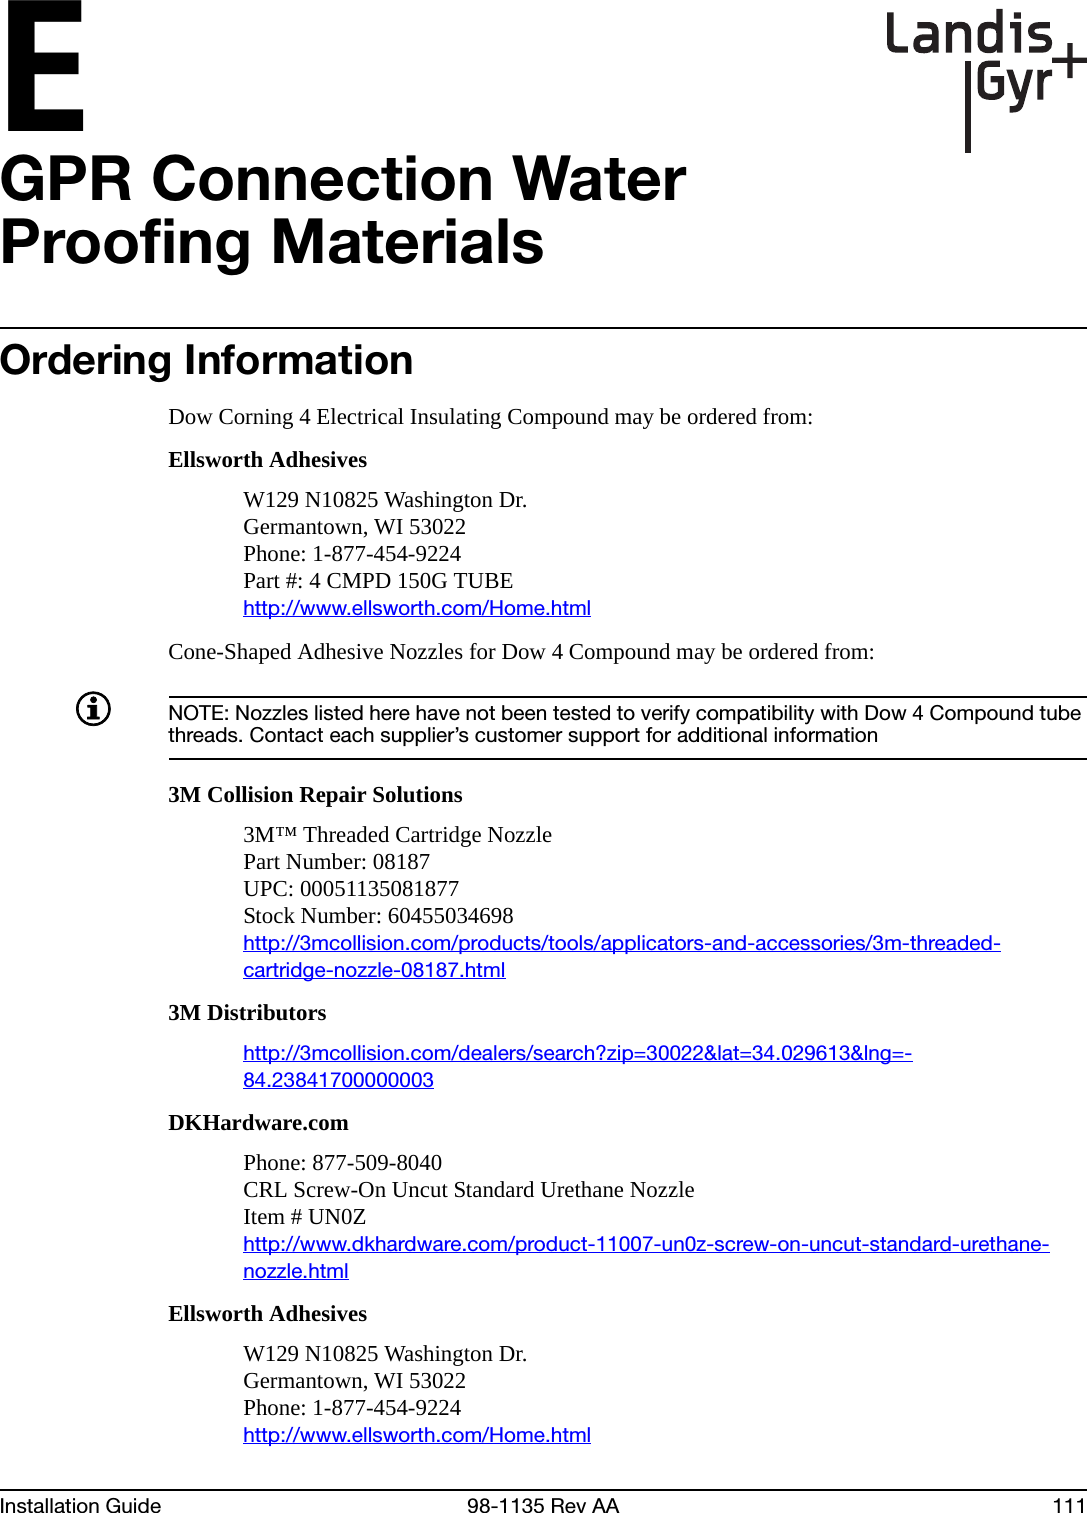 EInstallation Guide 98-1135 Rev AA 111GPR Connection Water Proofing MaterialsOrdering InformationDow Corning 4 Electrical Insulating Compound may be ordered from:Ellsworth AdhesivesW129 N10825 Washington Dr.Germantown, WI 53022Phone: 1-877-454-9224Part #: 4 CMPD 150G TUBEhttp://www.ellsworth.com/Home.htmlCone-Shaped Adhesive Nozzles for Dow 4 Compound may be ordered from:NOTE: Nozzles listed here have not been tested to verify compatibility with Dow 4 Compound tube threads. Contact each supplier’s customer support for additional information3M Collision Repair Solutions3M™ Threaded Cartridge NozzlePart Number: 08187UPC: 00051135081877Stock Number: 60455034698http://3mcollision.com/products/tools/applicators-and-accessories/3m-threaded-cartridge-nozzle-08187.html3M Distributorshttp://3mcollision.com/dealers/search?zip=30022&amp;lat=34.029613&amp;lng=-84.23841700000003DKHardware.comPhone: 877-509-8040CRL Screw-On Uncut Standard Urethane NozzleItem # UN0Zhttp://www.dkhardware.com/product-11007-un0z-screw-on-uncut-standard-urethane-nozzle.htmlEllsworth AdhesivesW129 N10825 Washington Dr.Germantown, WI 53022Phone: 1-877-454-9224http://www.ellsworth.com/Home.html